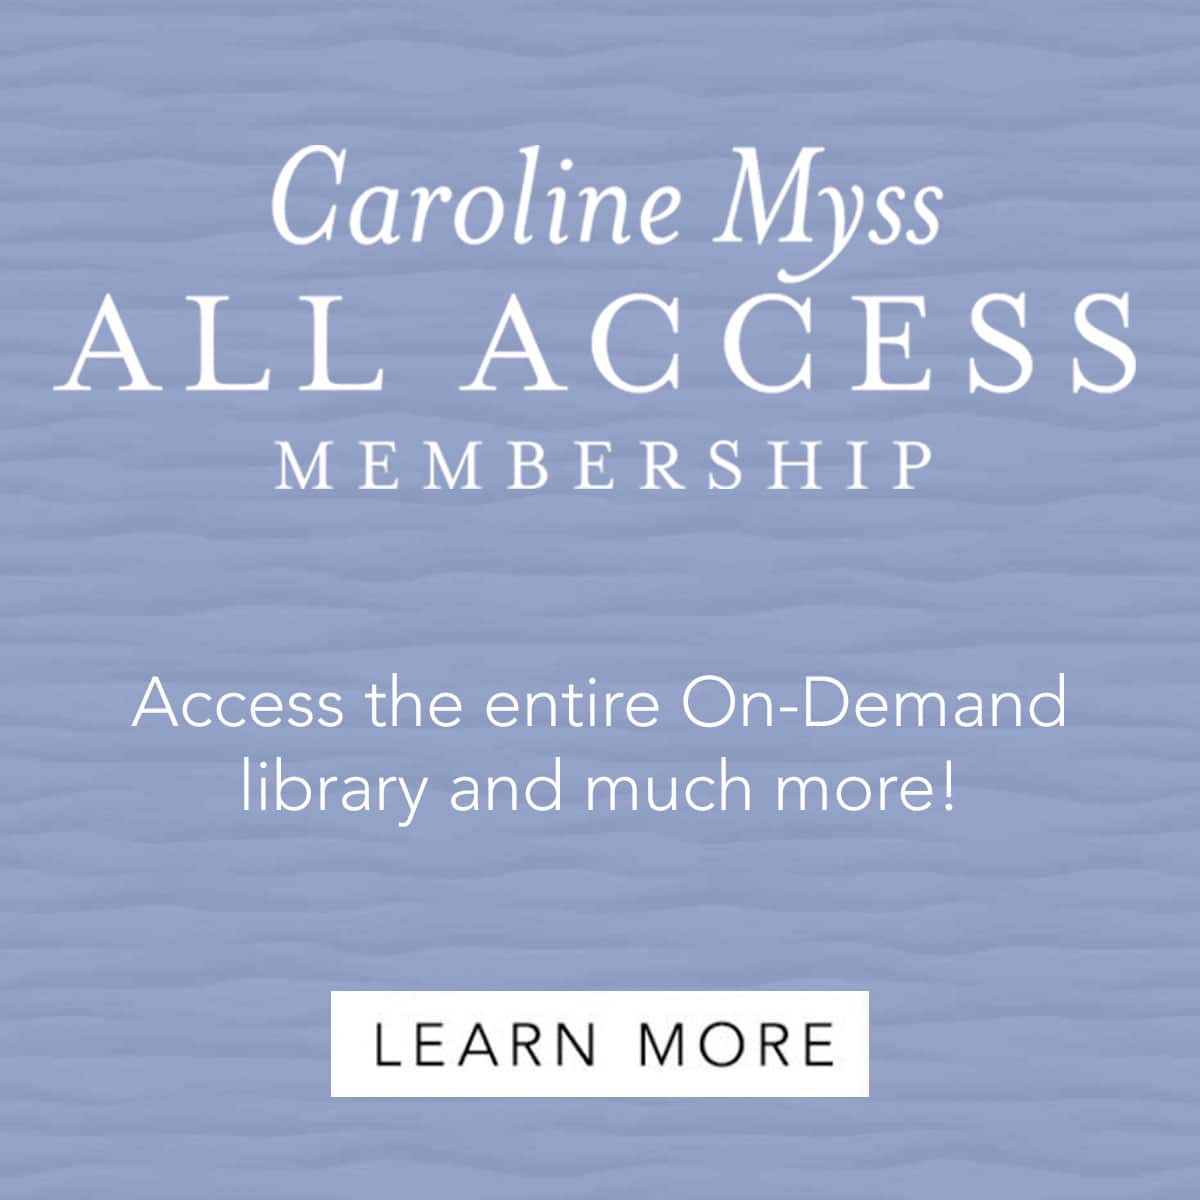 Caroline Myss All Access - Access the entire On-Demand Library and much more!